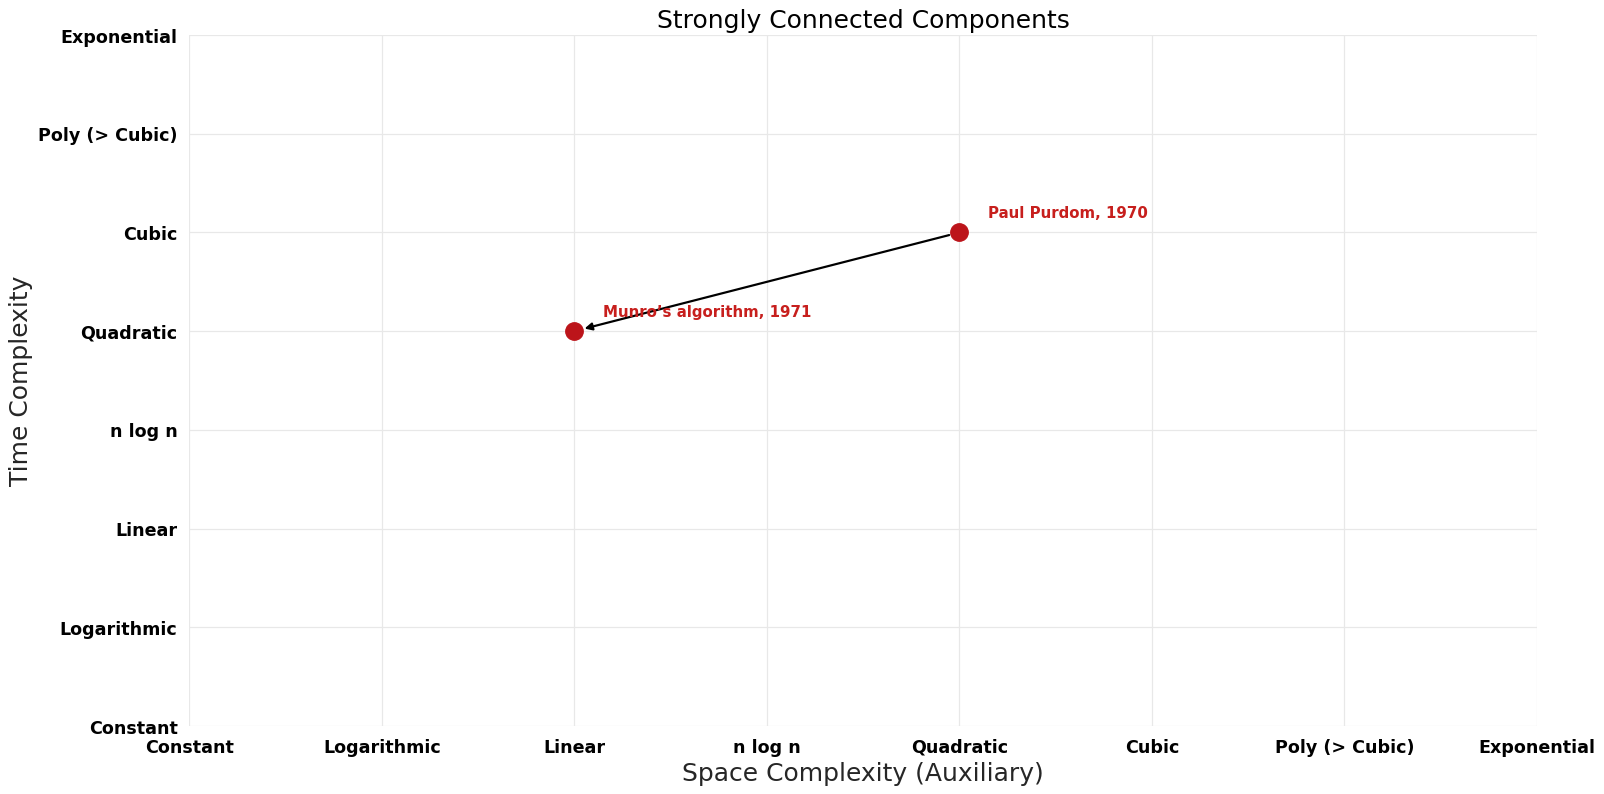 File:Strongly Connected Components - Pareto Frontier.png